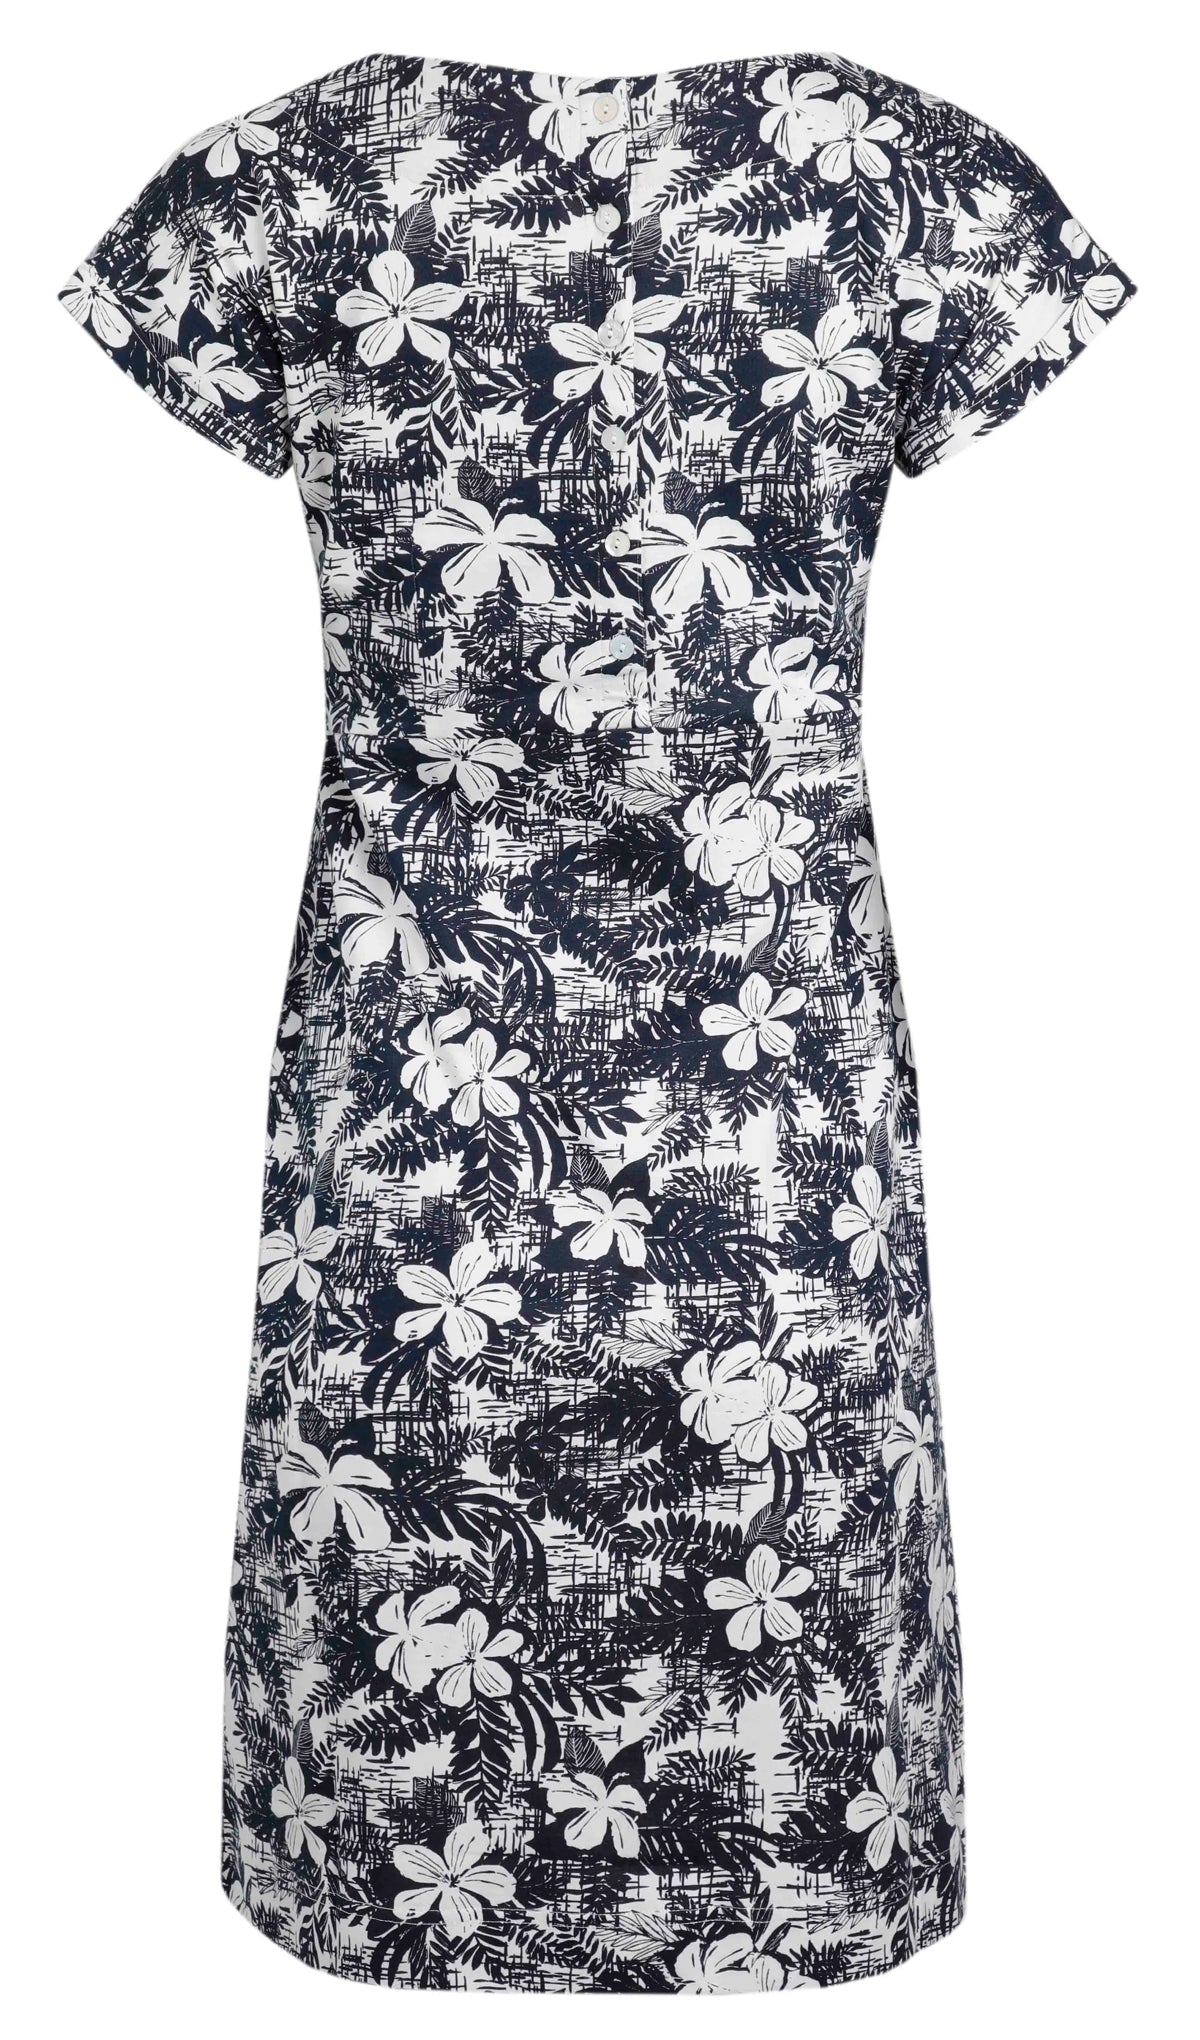 Dark Denim Blue with a White floral print Tallahassee women's dress from Weird Fish.